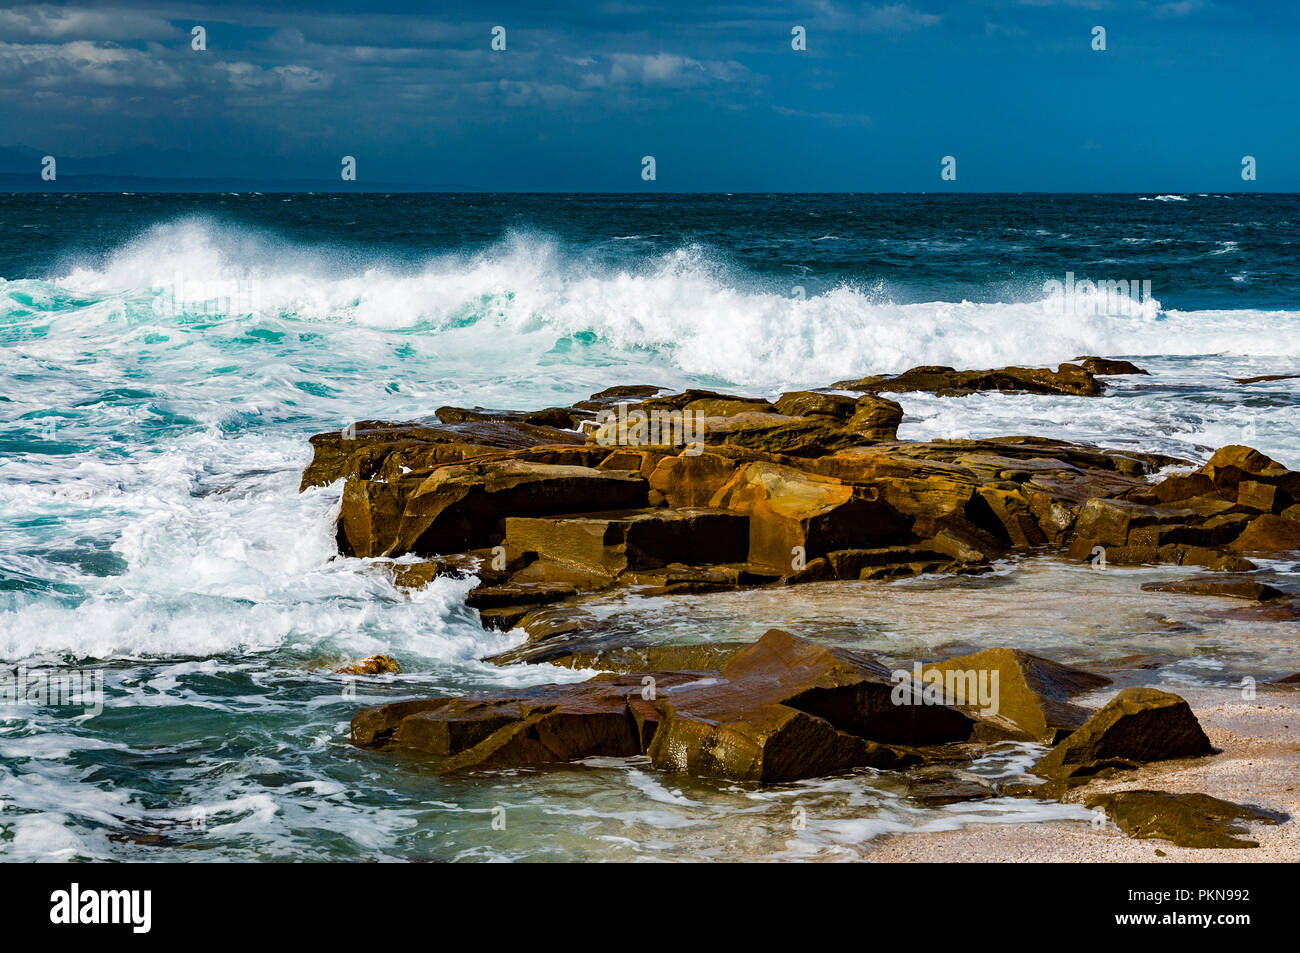 Small waves crashing on brown rocks in the South Atlantic, South Africa Stock Photo